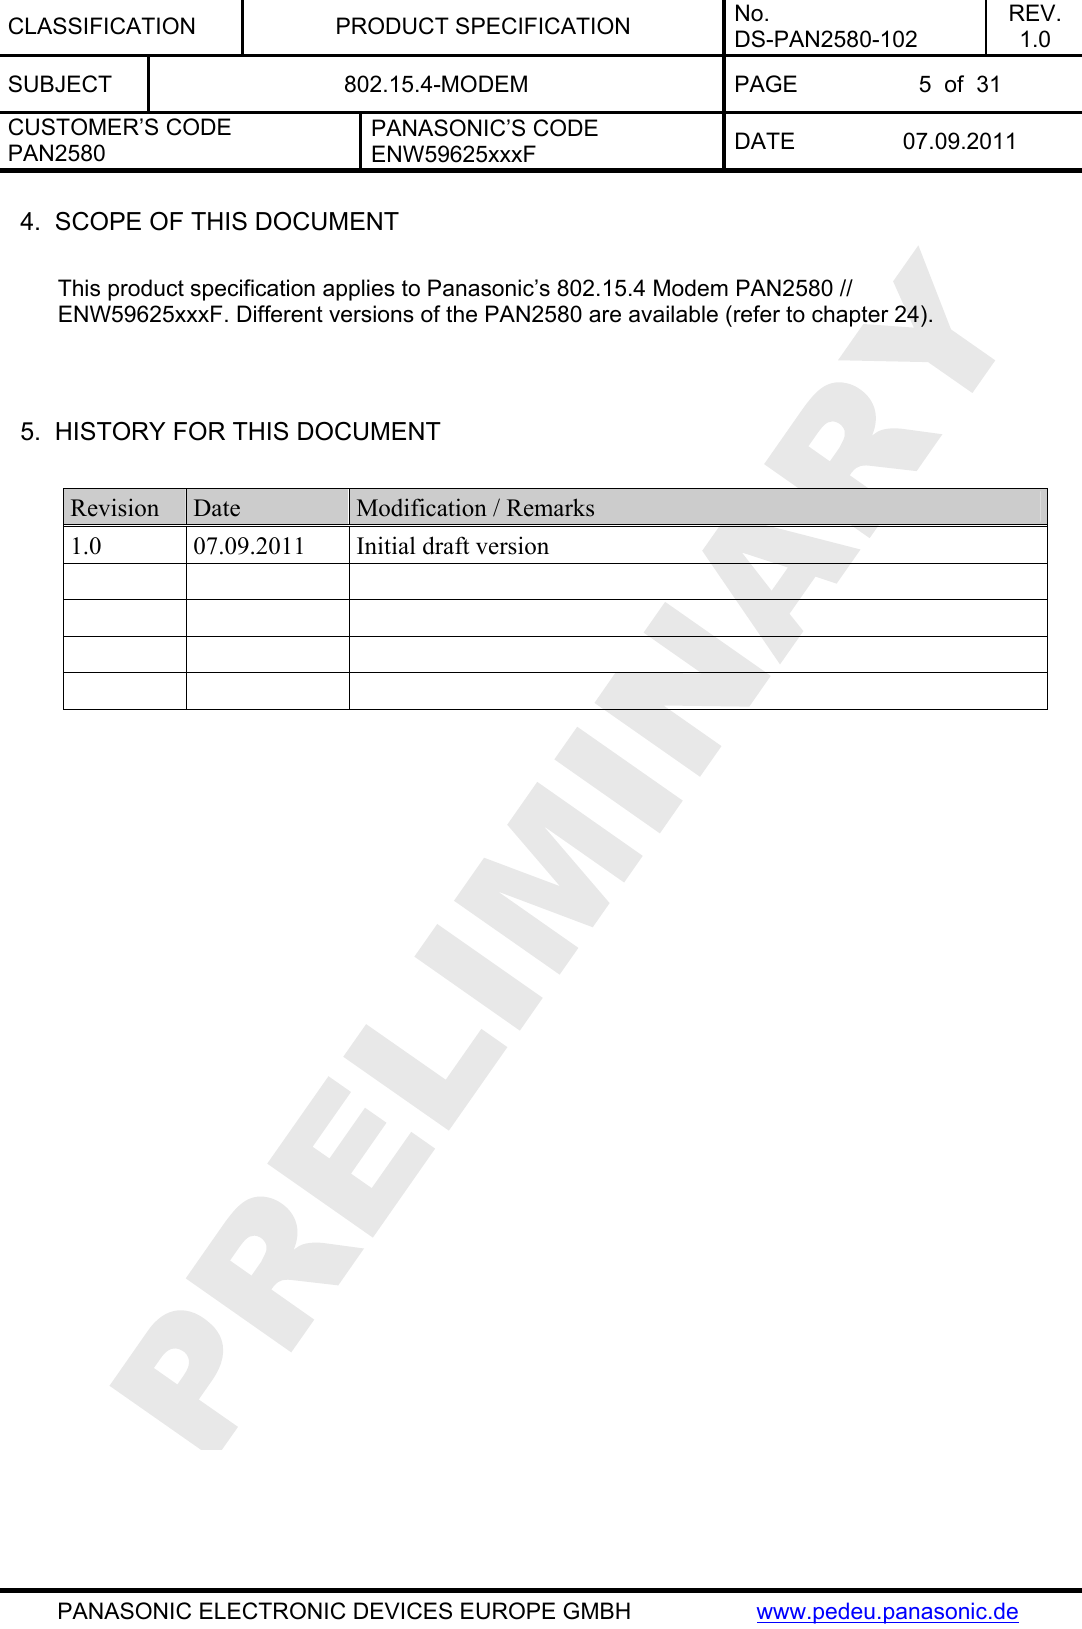 CLASSIFICATION PRODUCT SPECIFICATION No. DS-PAN2580-102 REV. 1.0 SUBJECT  802.15.4-MODEM  PAGE  5  of  31 CUSTOMER’S CODE PAN2580 PANASONIC’S CODE ENW59625xxxF  DATE 07.09.2011   PANASONIC ELECTRONIC DEVICES EUROPE GMBH  www.pedeu.panasonic.de  4.  SCOPE OF THIS DOCUMENT  This product specification applies to Panasonic’s 802.15.4 Modem P  // . Different versions of the PAN2580 are available (refer to chapter AN2580ENW59625xxxF 24).   5.  HISTORY FOR THIS DOCUMENT  Revision  Date  Modification / Remarks 1.0 07.09.2011 Initial draft version                   